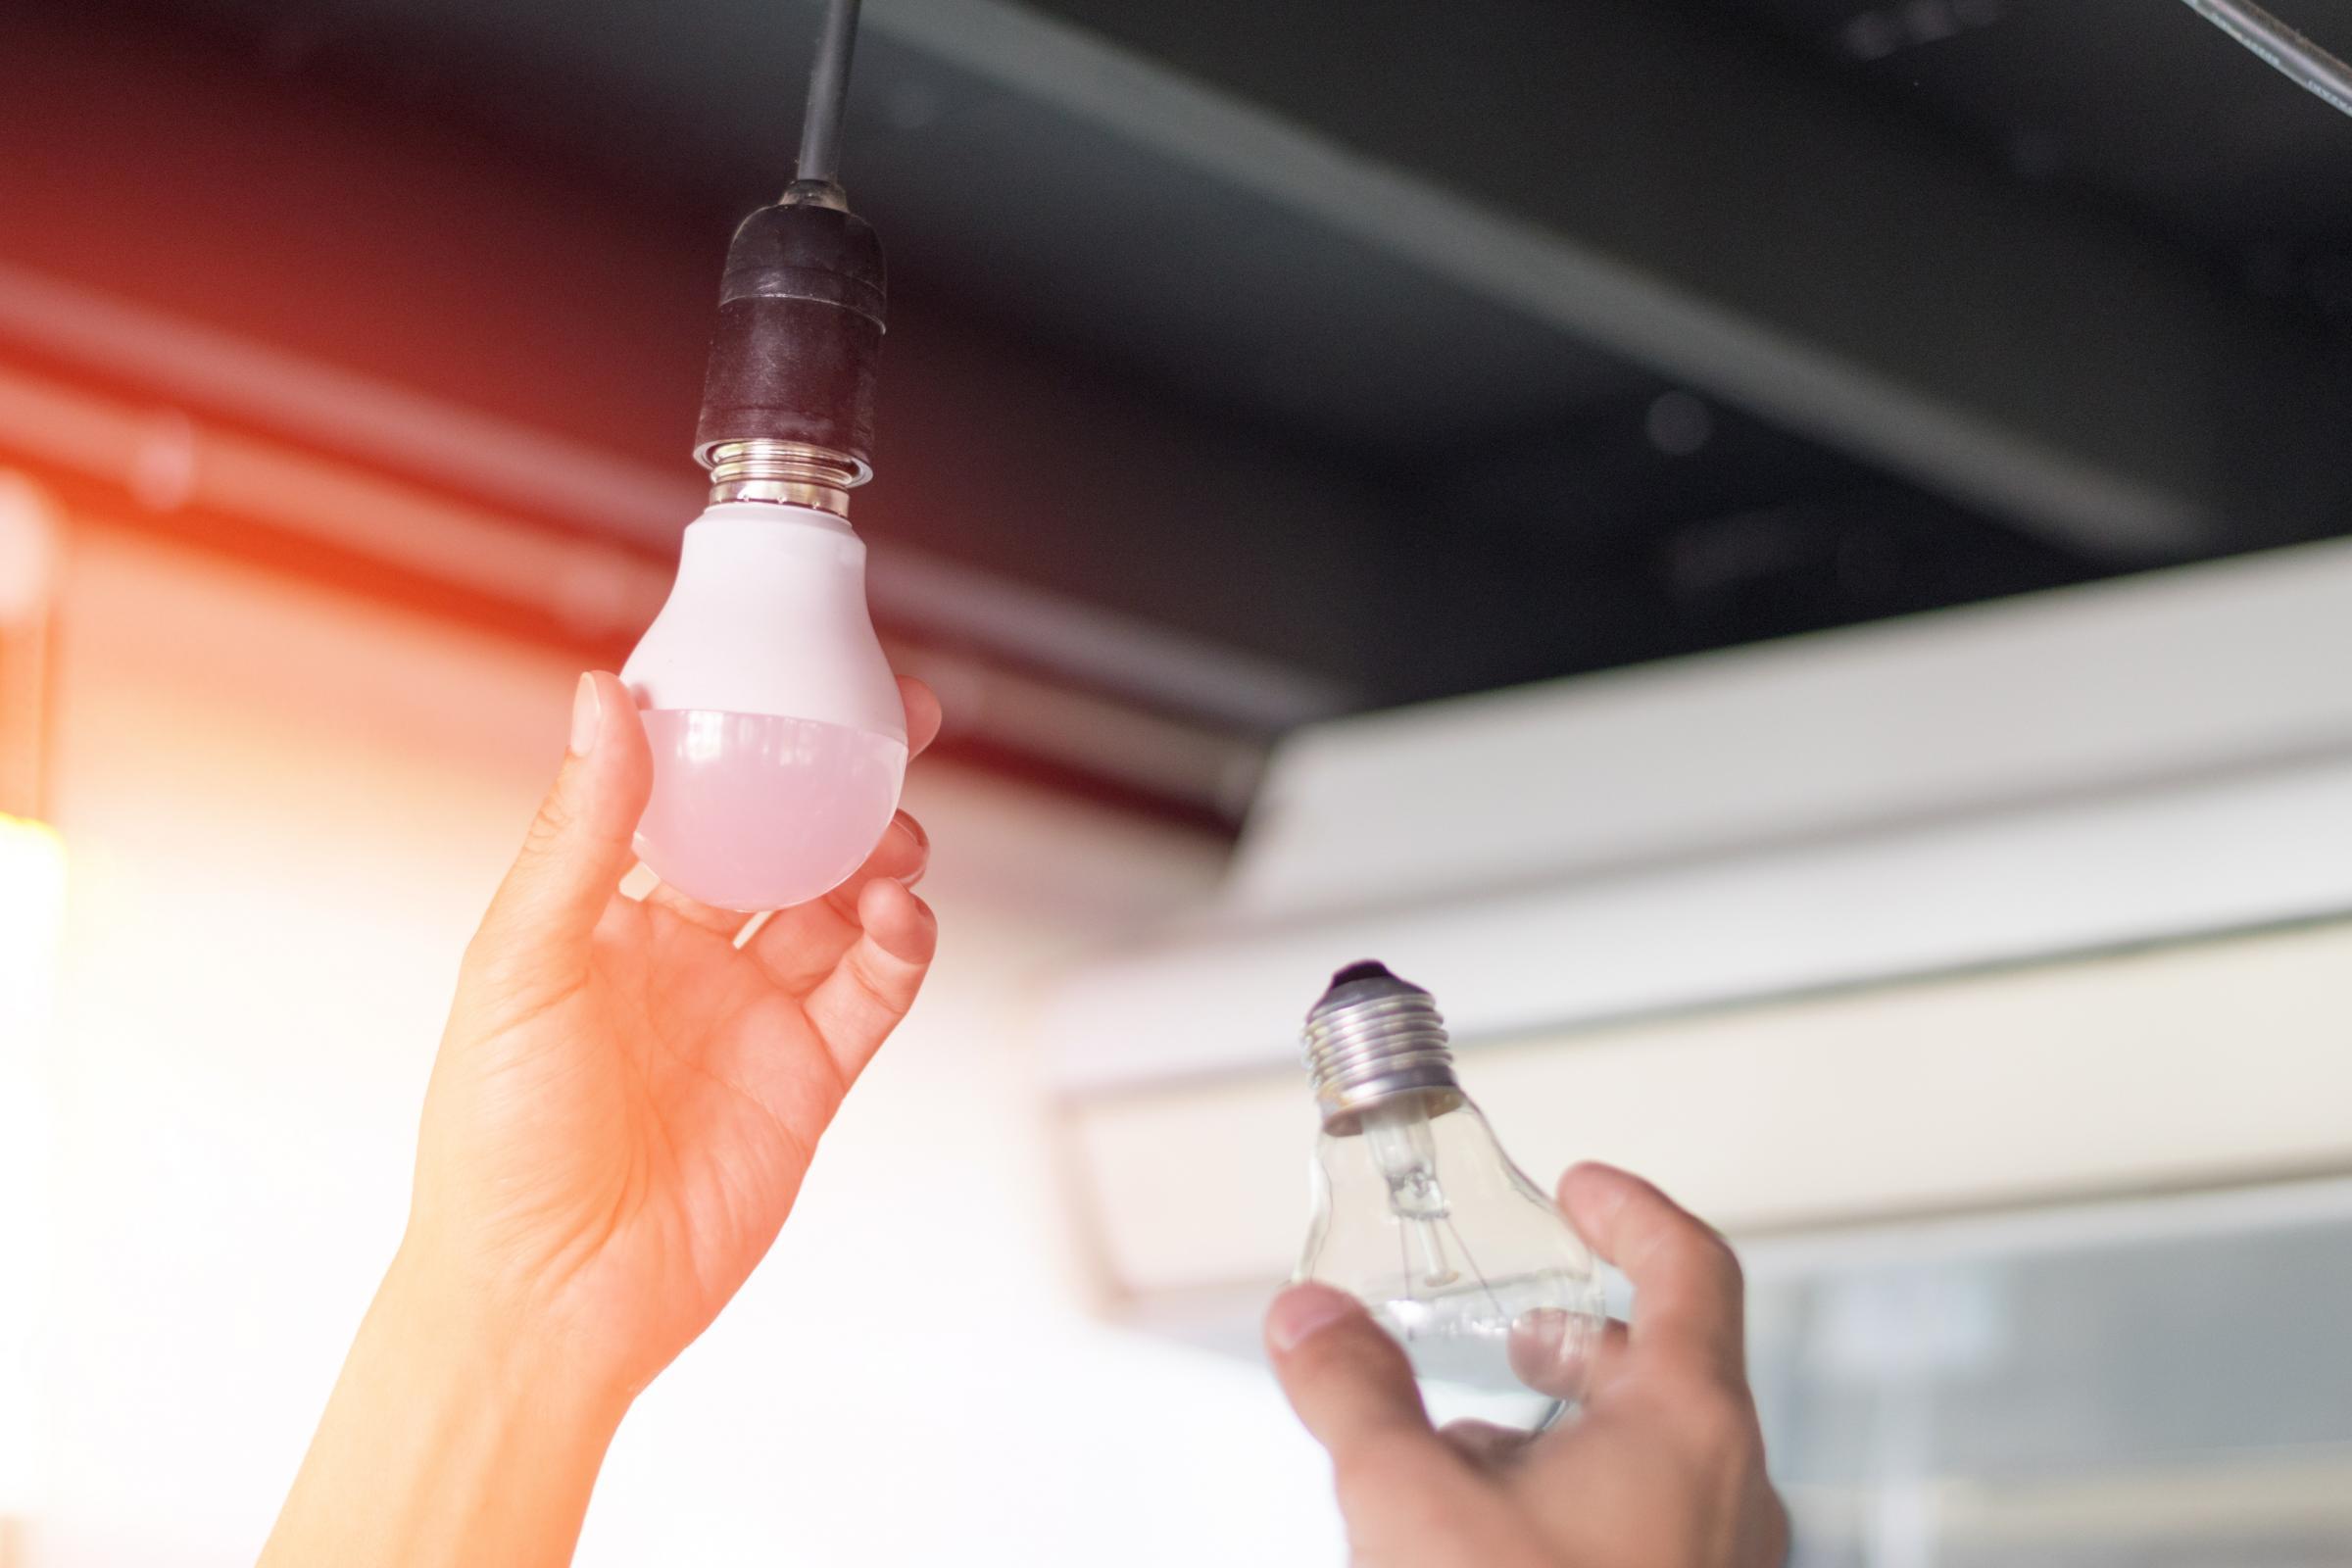 Replacing incandescent lightbulb with energy efficient LED bulb